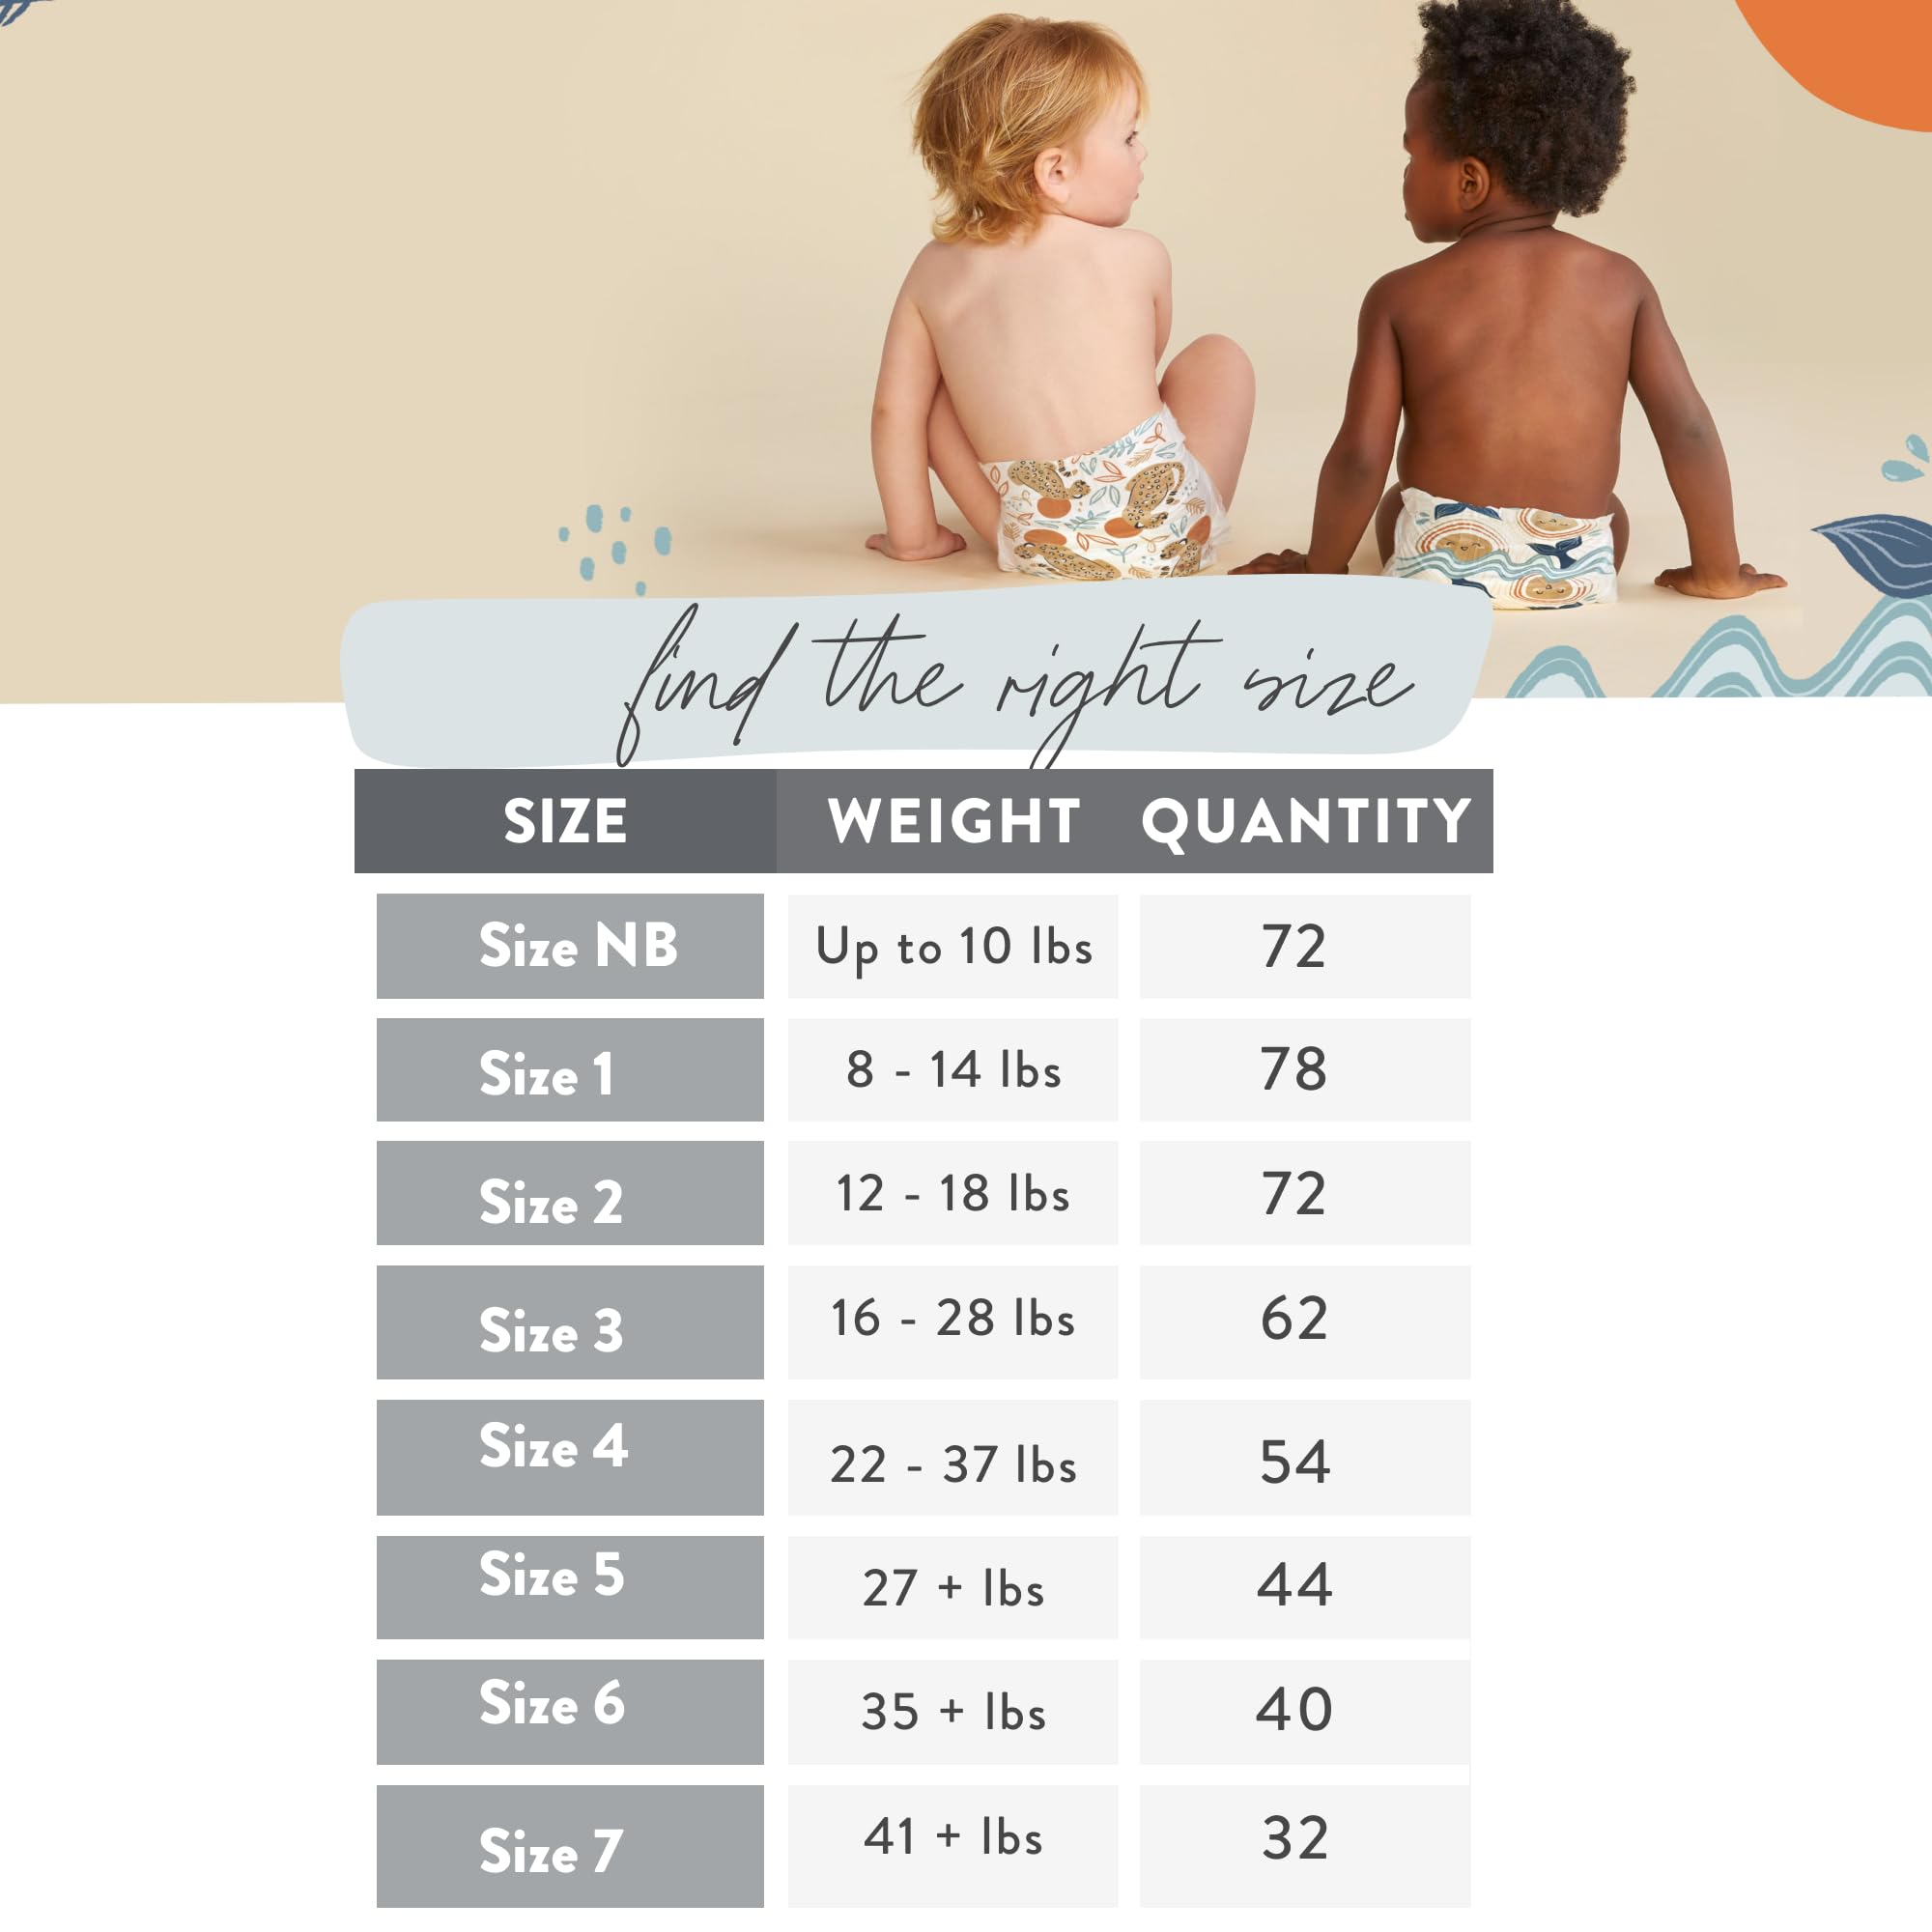 The Honest Company Clean Conscious Diapers | Plant-Based, Sustainable | Rose Blossom + Tutu Cute | Club Box, Size Newborn, 72 Count